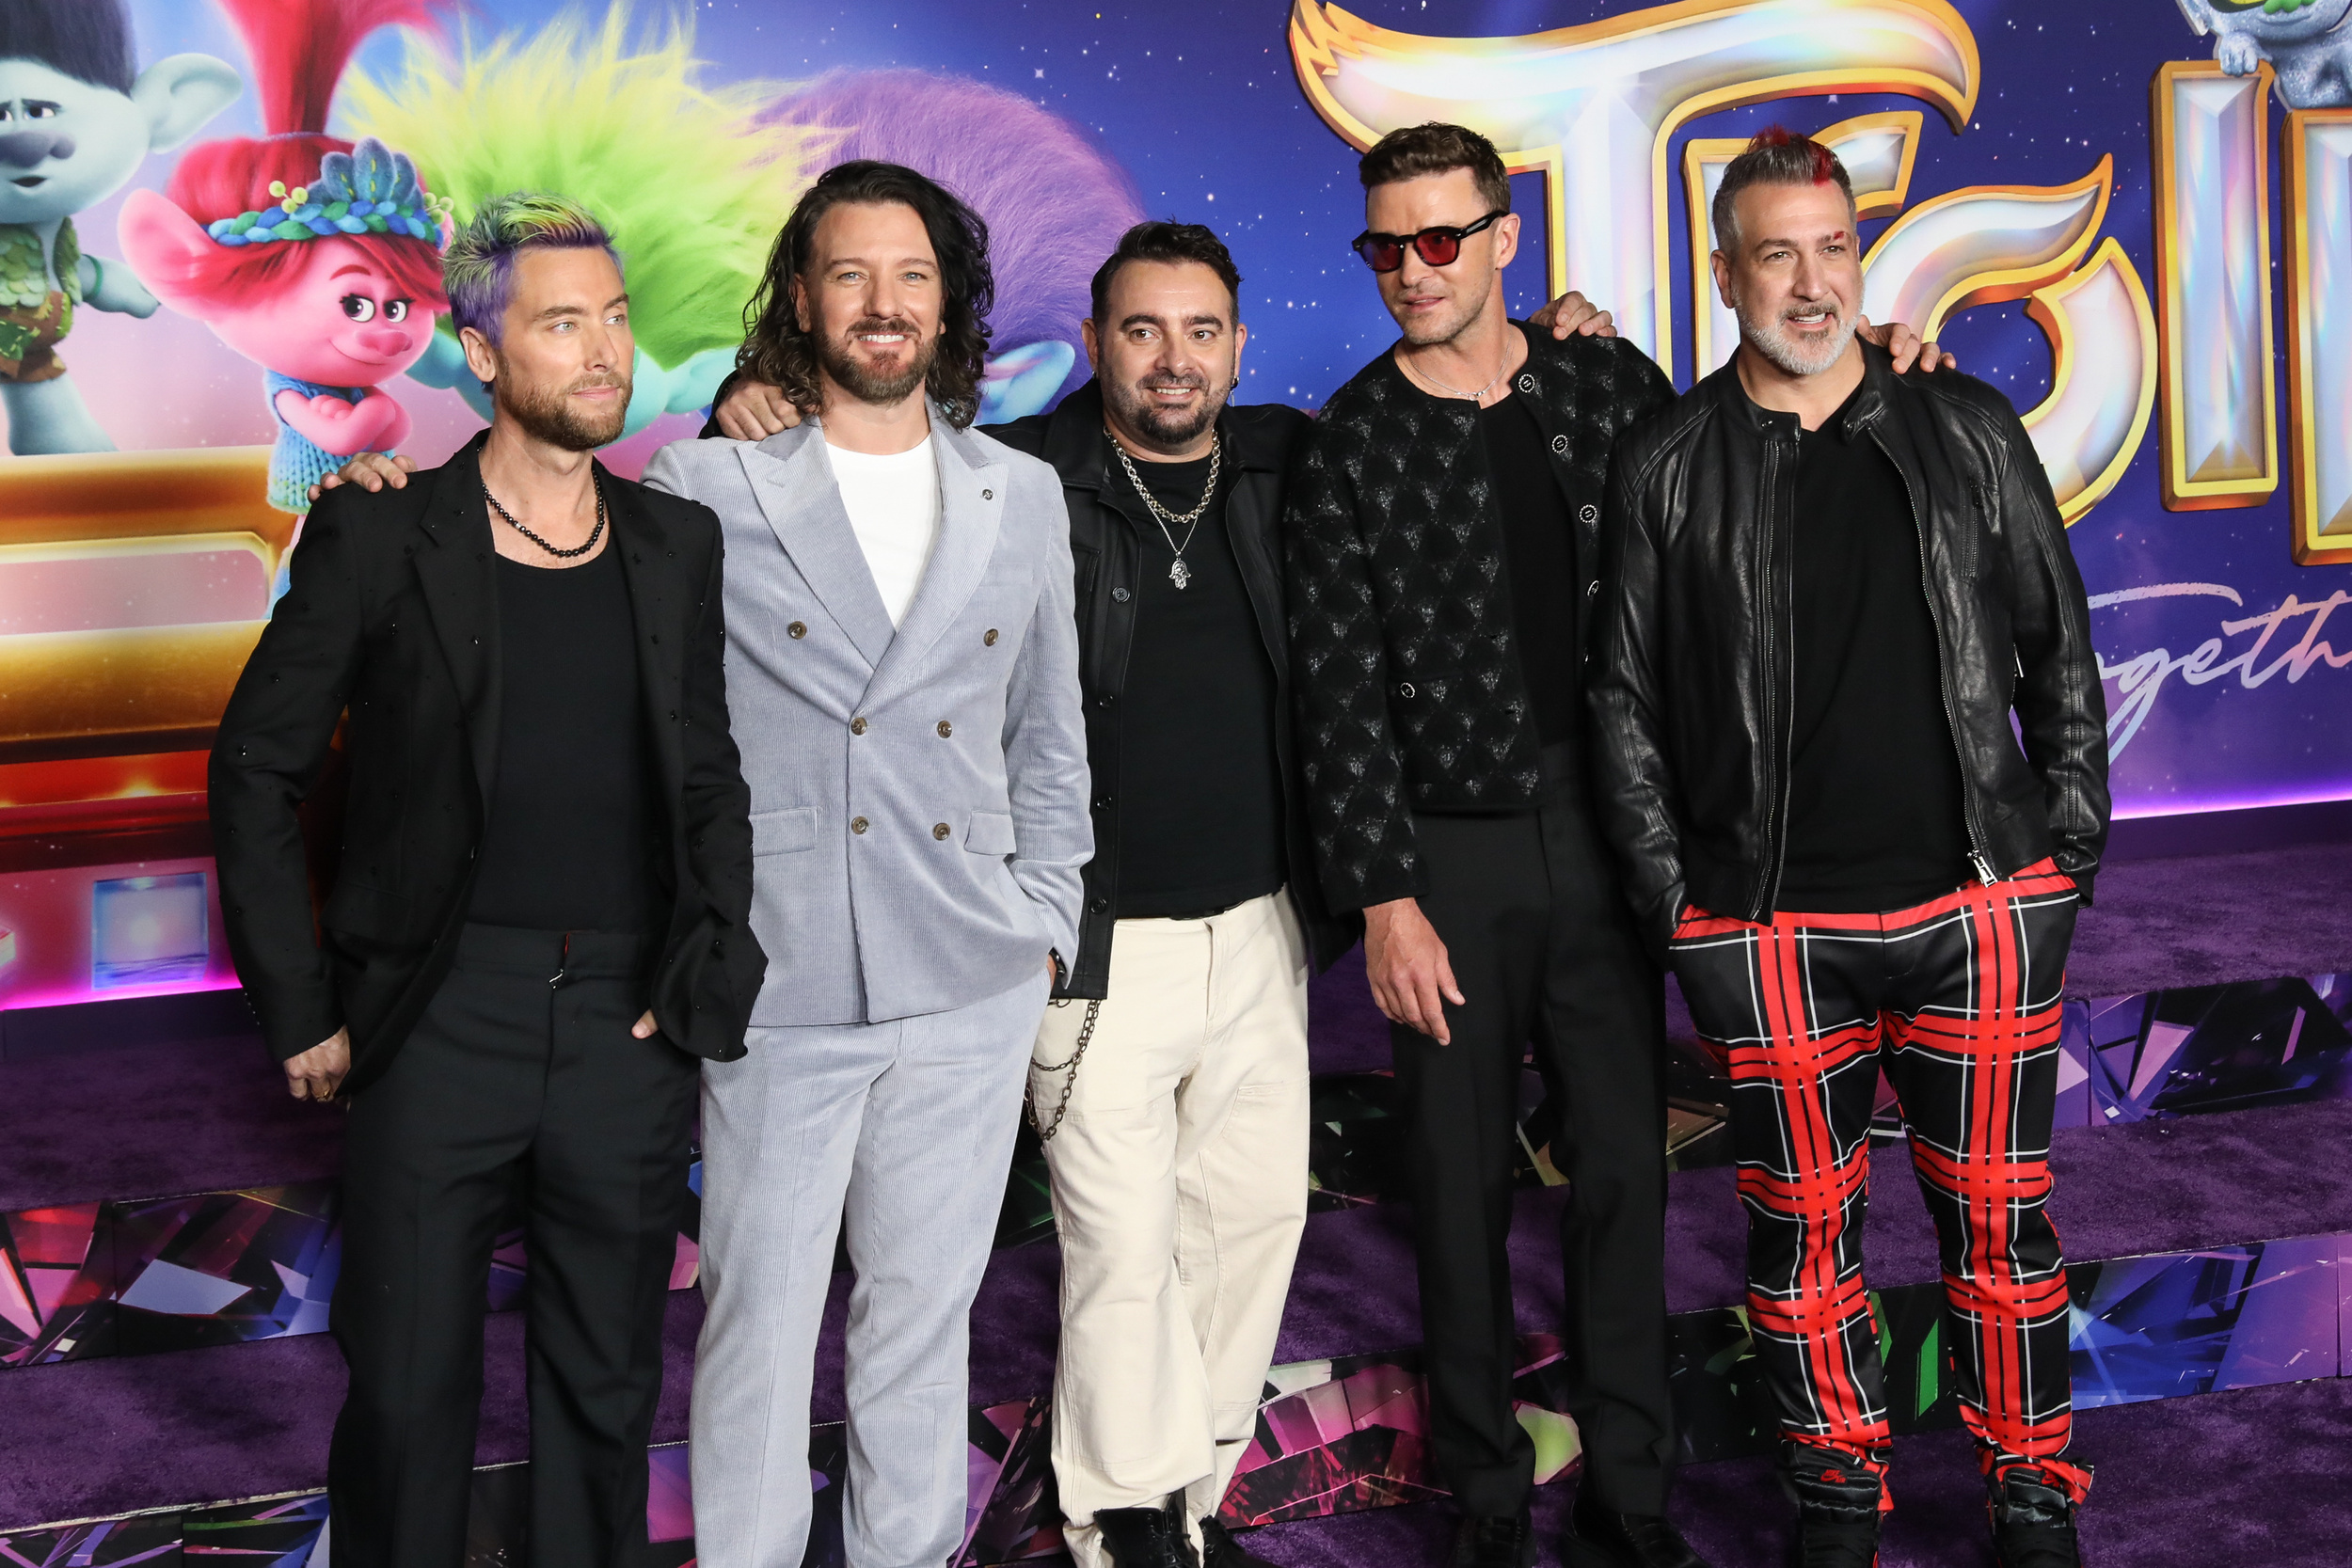 <p>Throwback hits are crucial to any road trip playlist, and NSYNC's "Bye Bye Bye" is at the top of the list.</p><p>You may also like: <a href='https://www.yardbarker.com/entertainment/articles/20_celebrities_who_are_godparents_to_other_celebrities_kids/s1__40313351'>20 celebrities who are godparents to other celebrities’ kids</a></p>